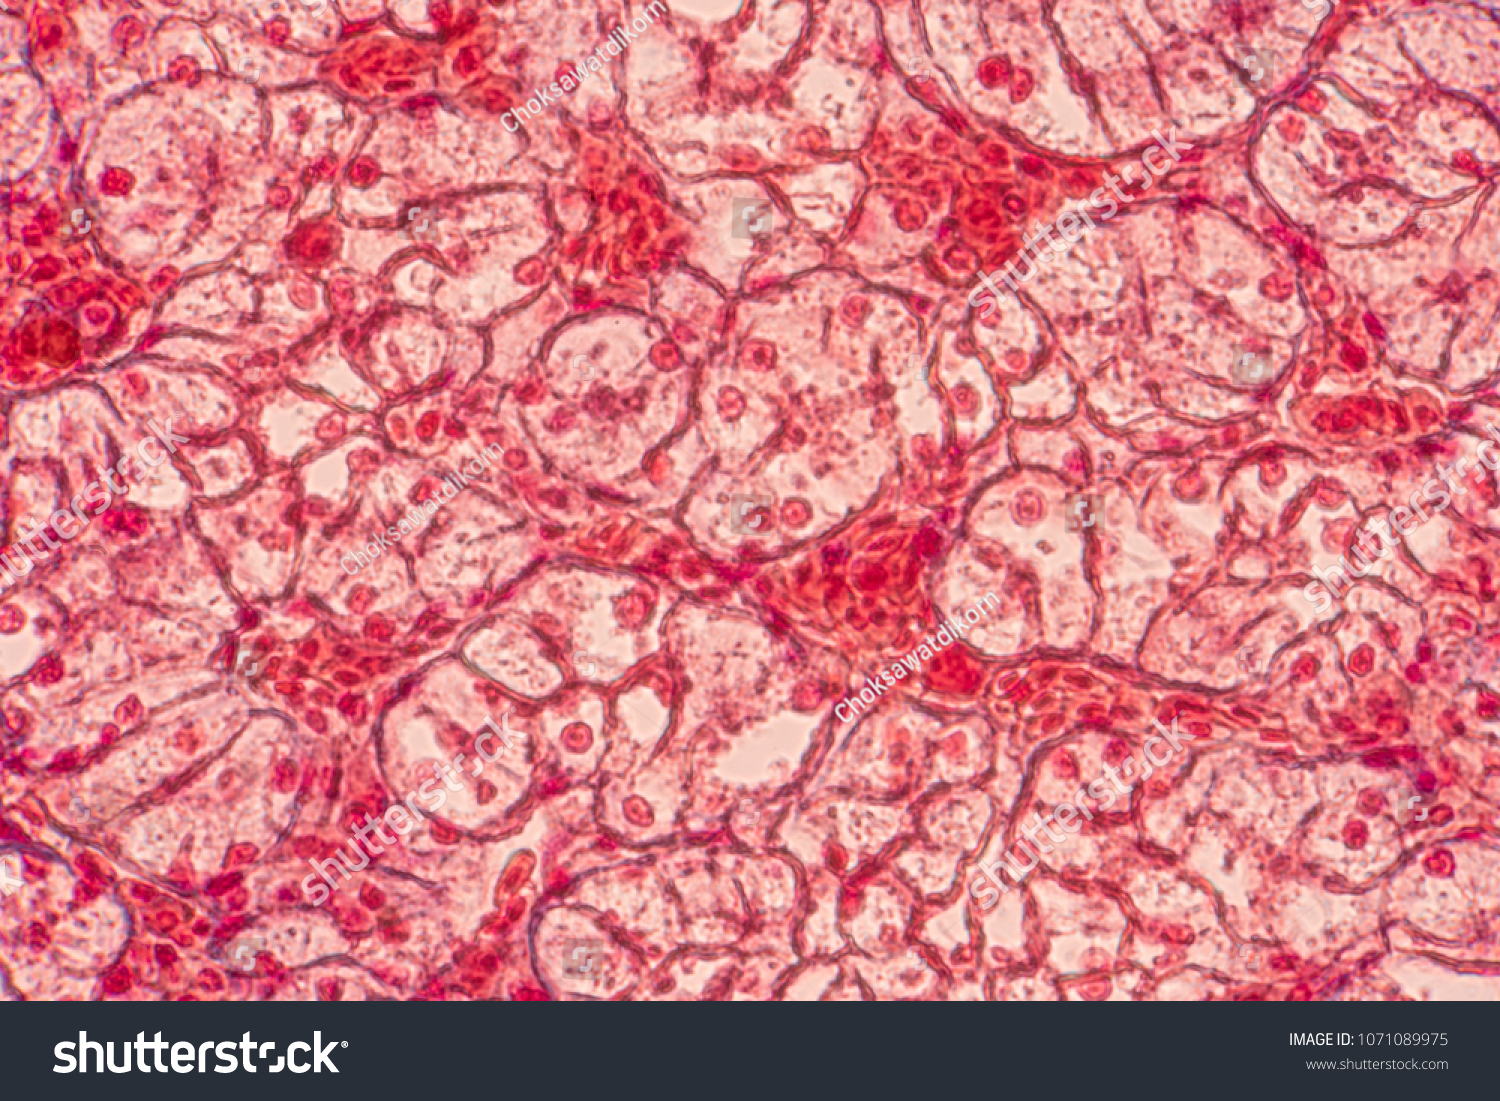 Squamous epithelial cells under microscope view for education histology. Human tissue. #1071089975